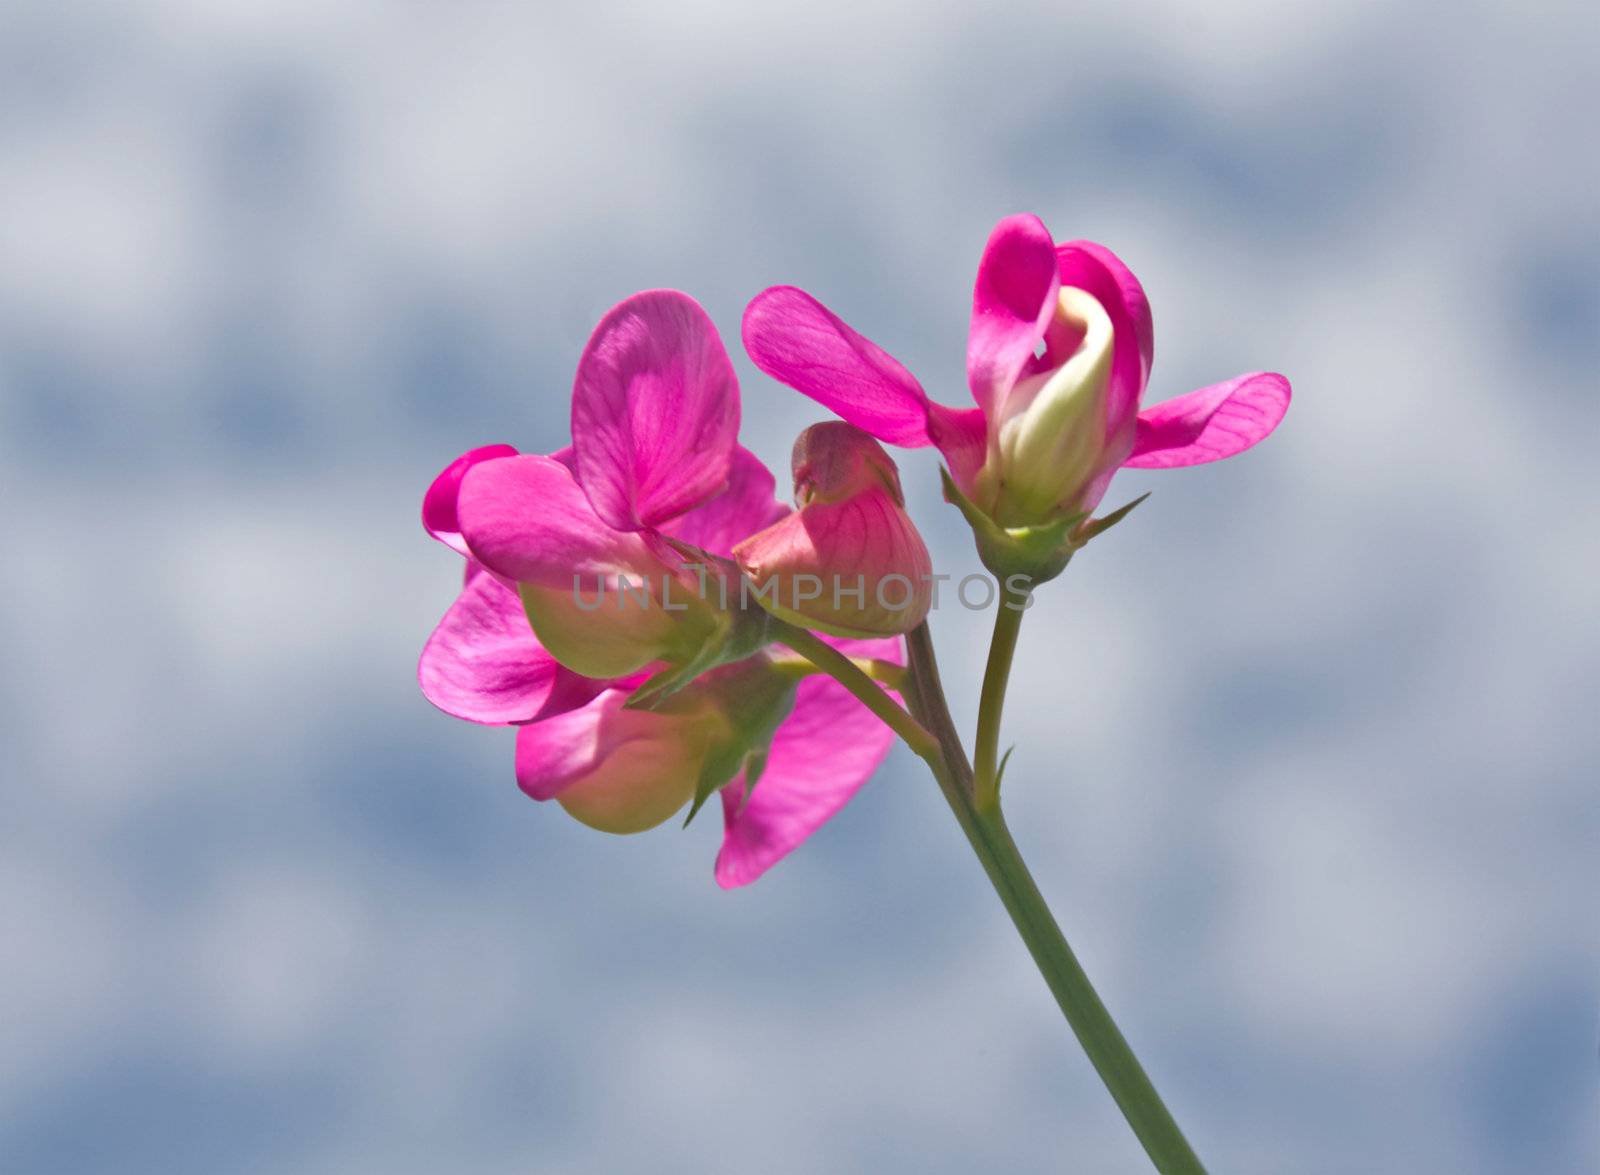 this image shows a sweet pea with sky and clouds